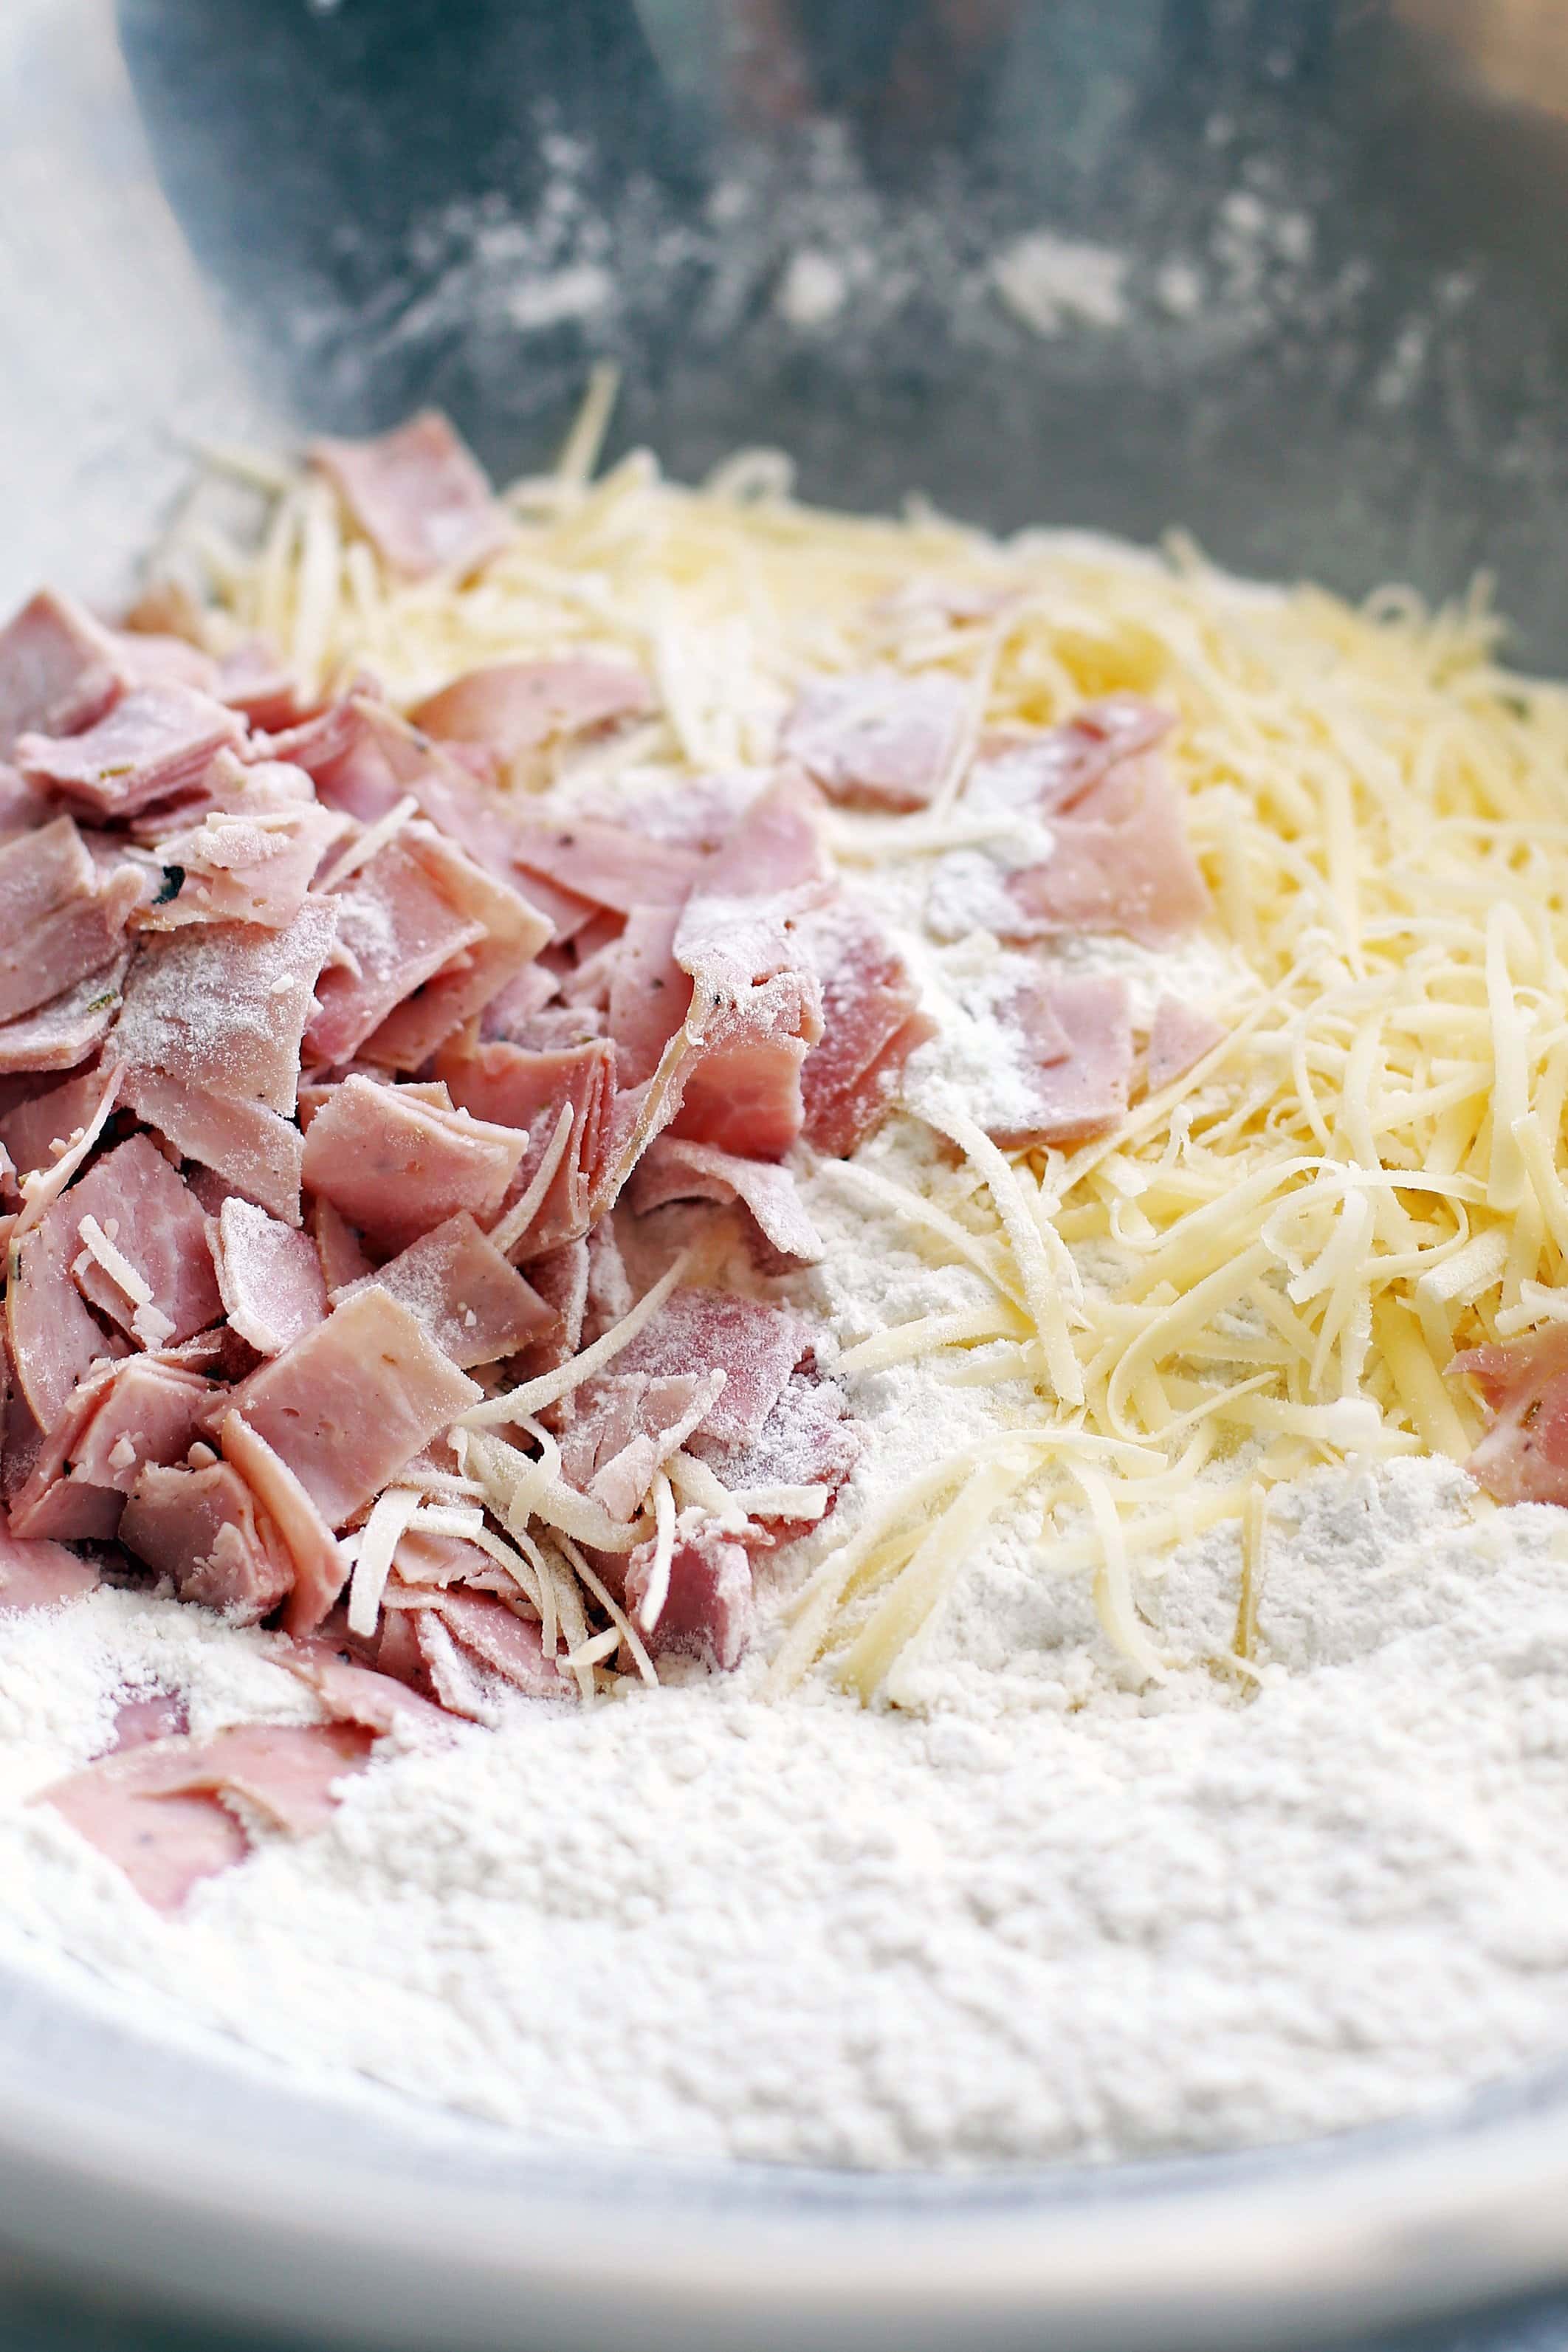 All-purpose flour, baking powder, sugar, salt, shredded cheese, and diced deli ham in a large stainless steel bowl.